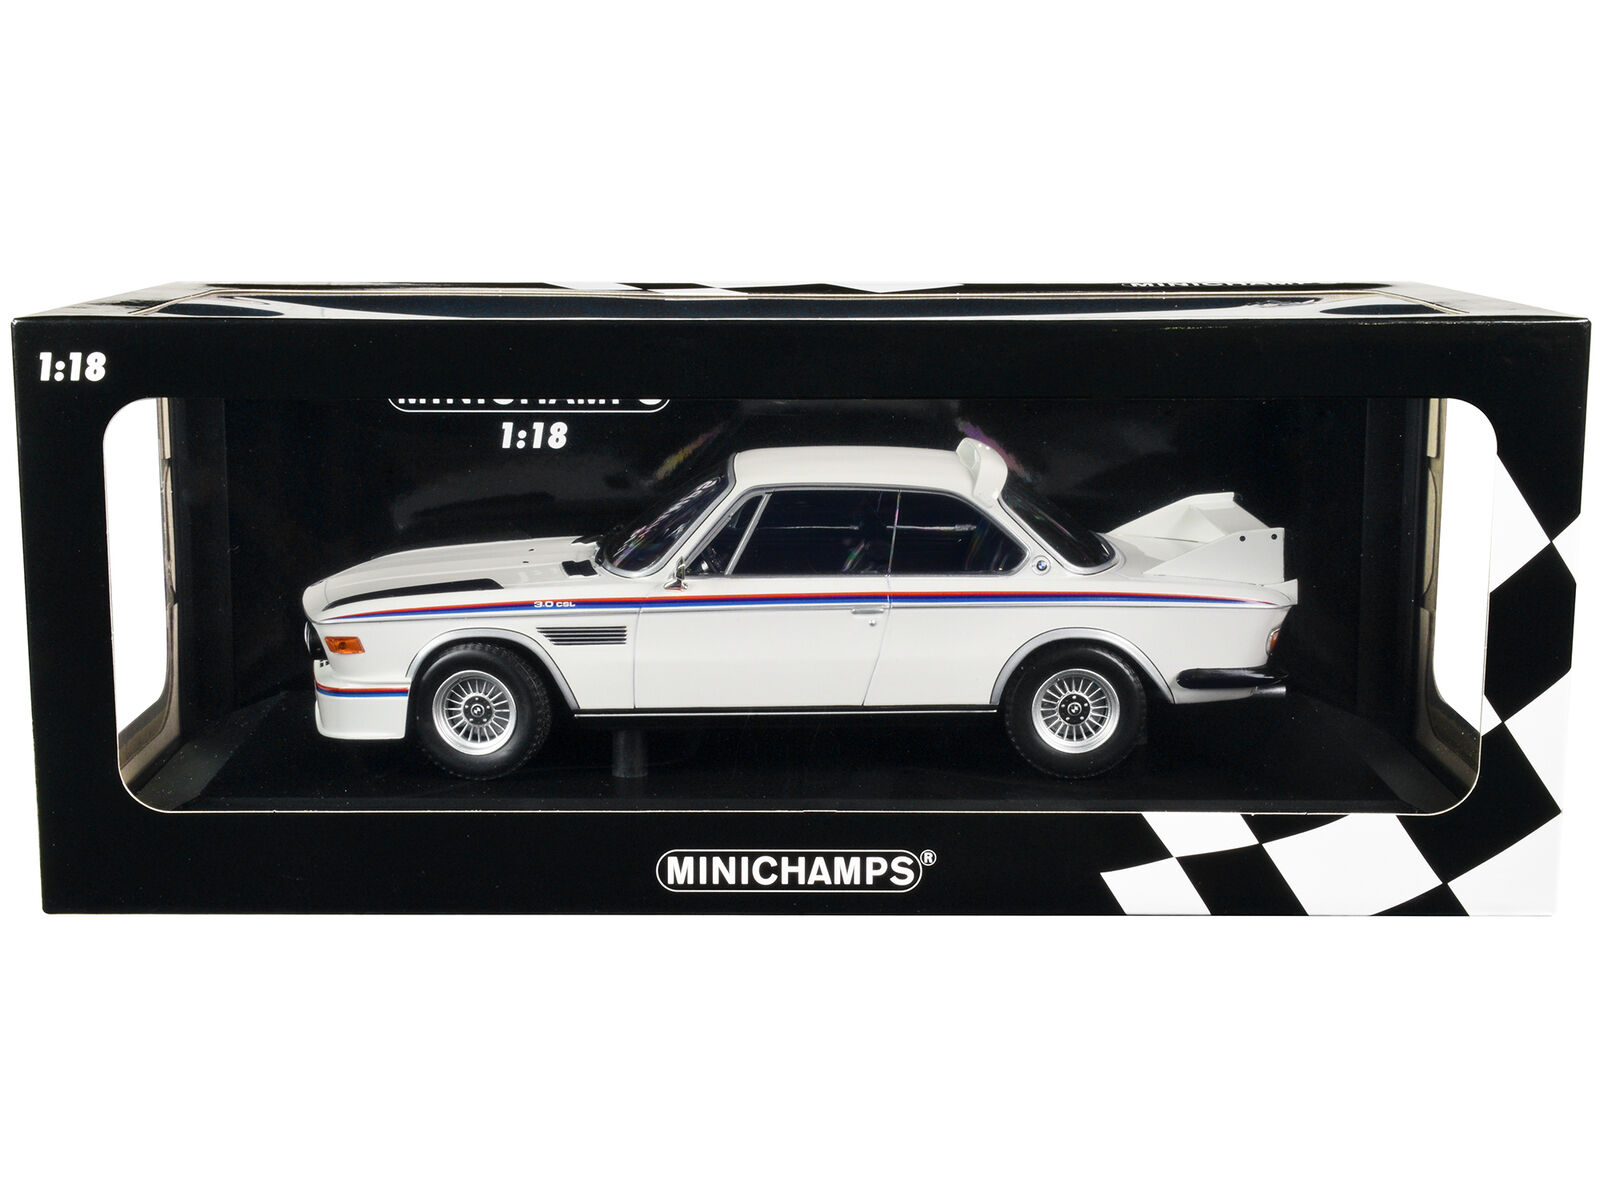 1973 BMW 3.0 CSL White with Red and Blue Stripes Limited Edition to 600 pieces